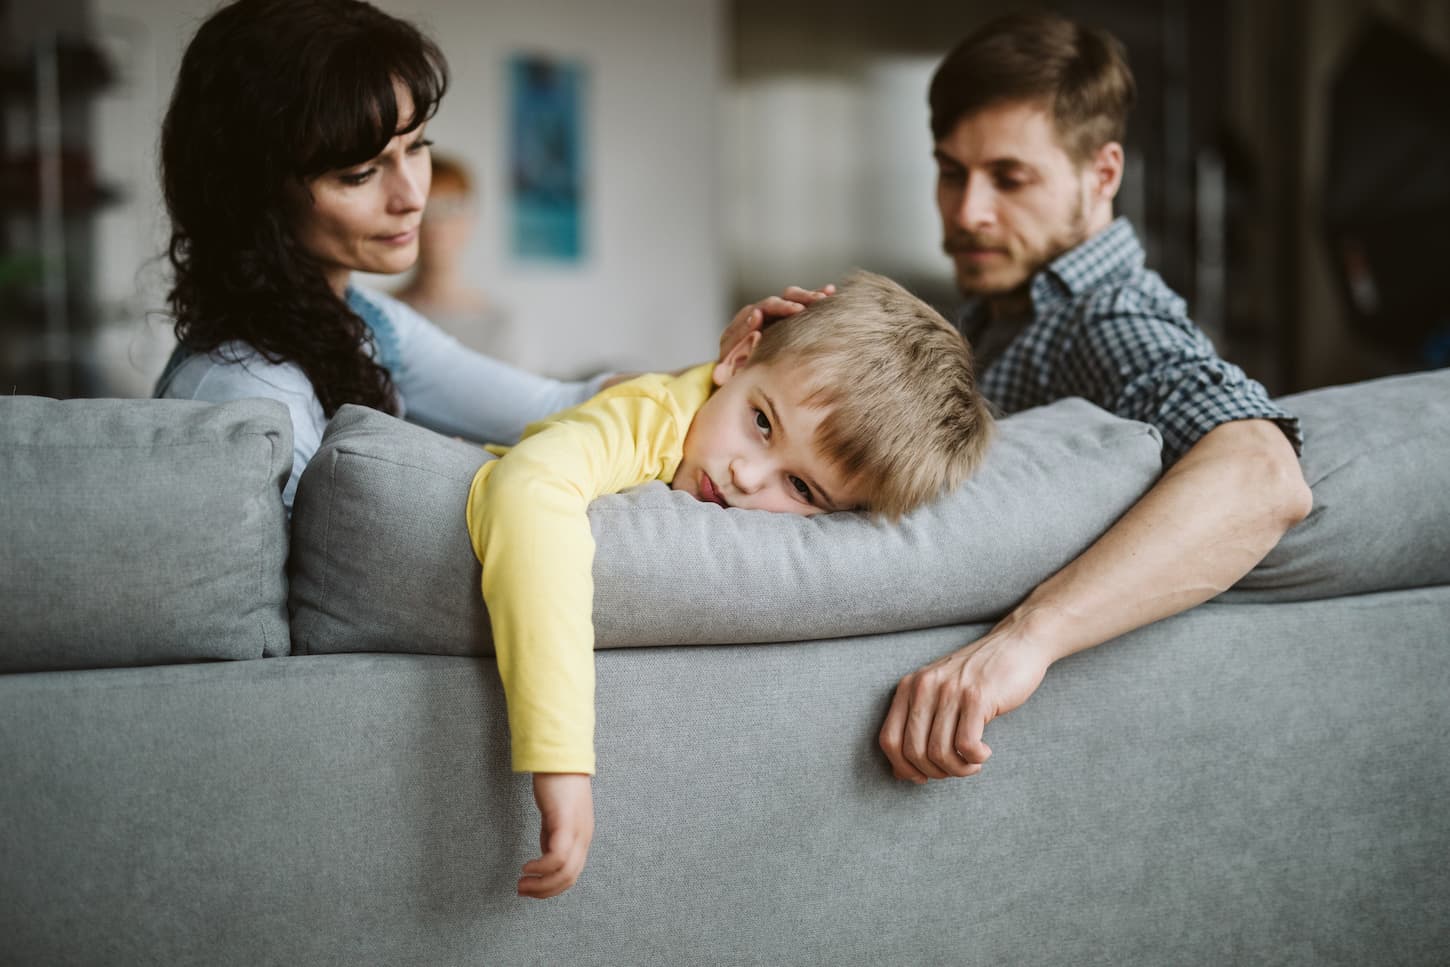 An image of a bored young kid lying on a couch next to his young worried parents.